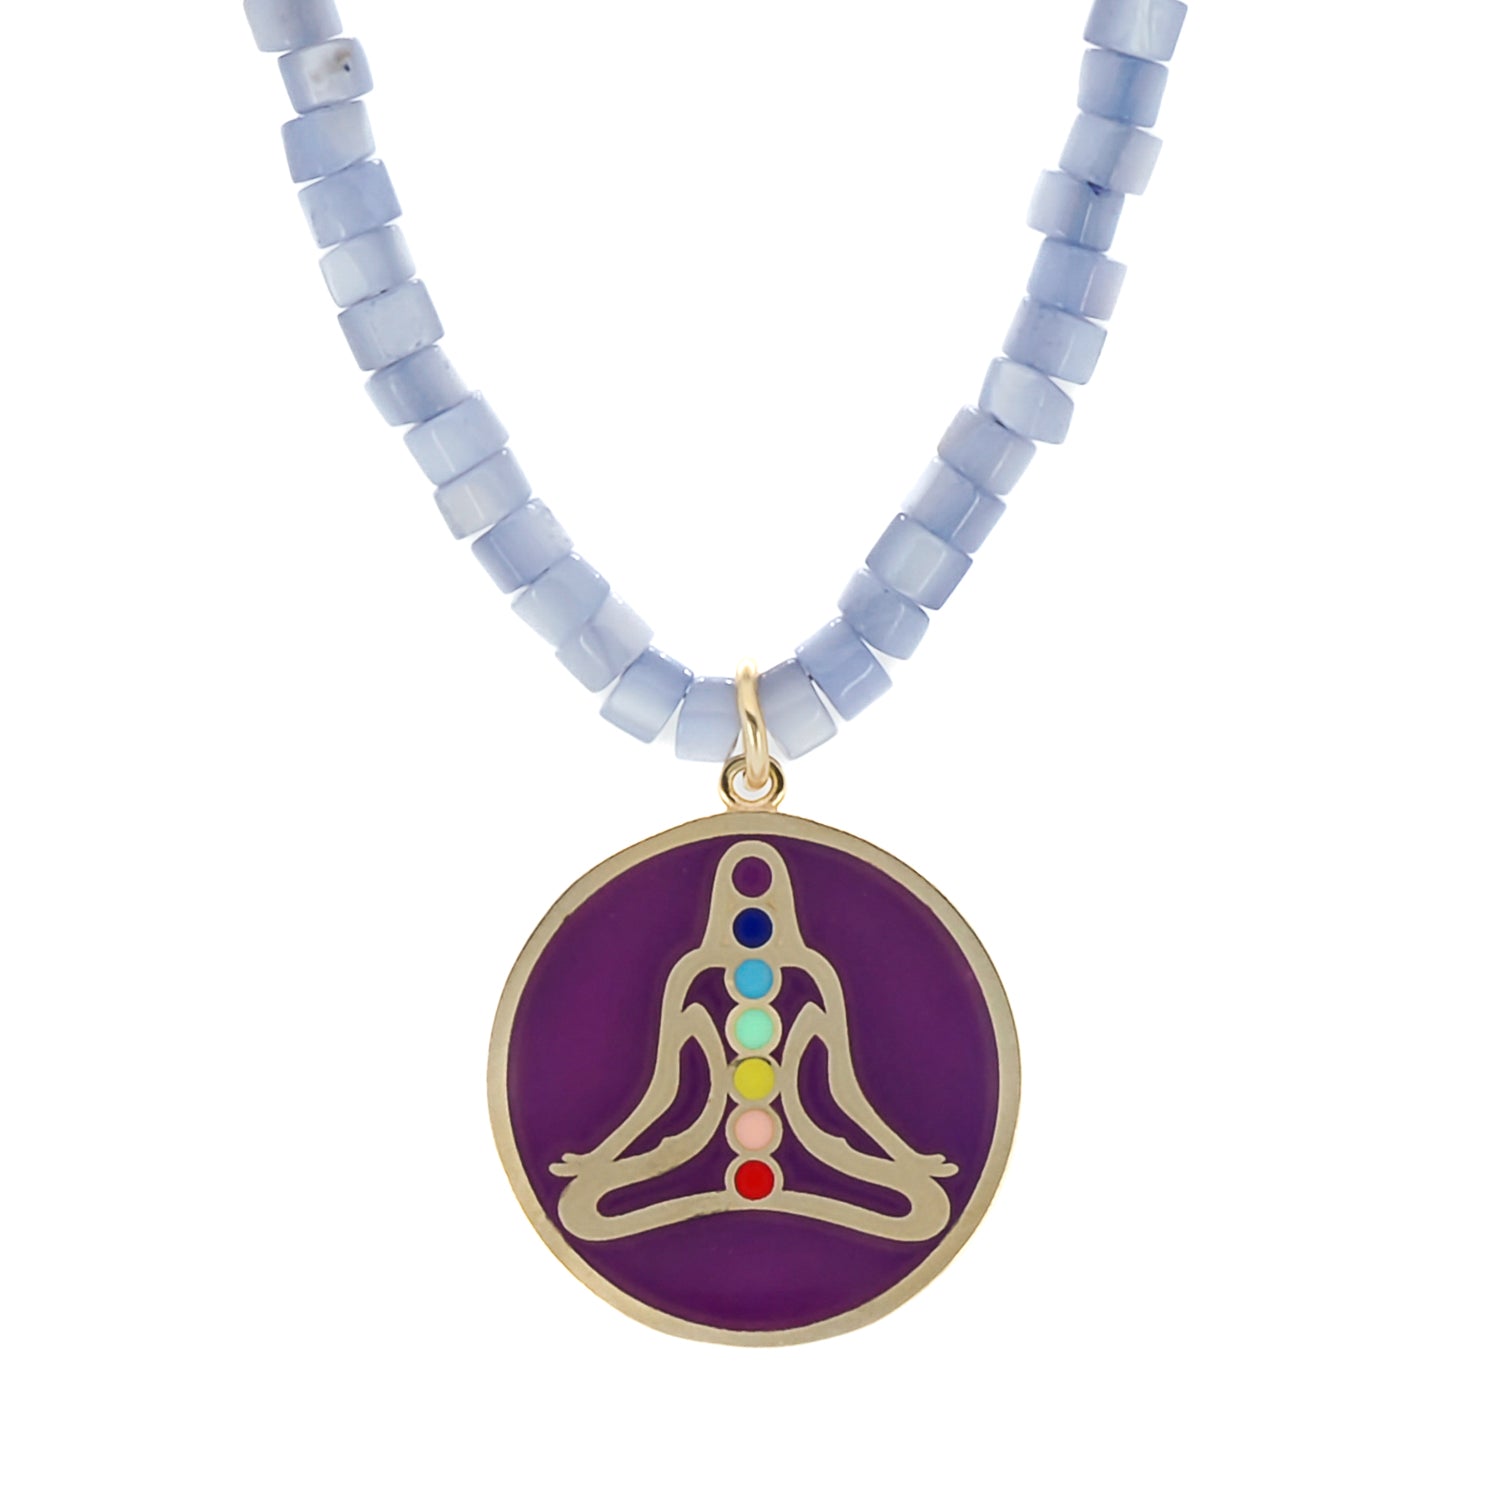 Handmade necklace with a purple chakra pendant and calming lilac color pearl beads.